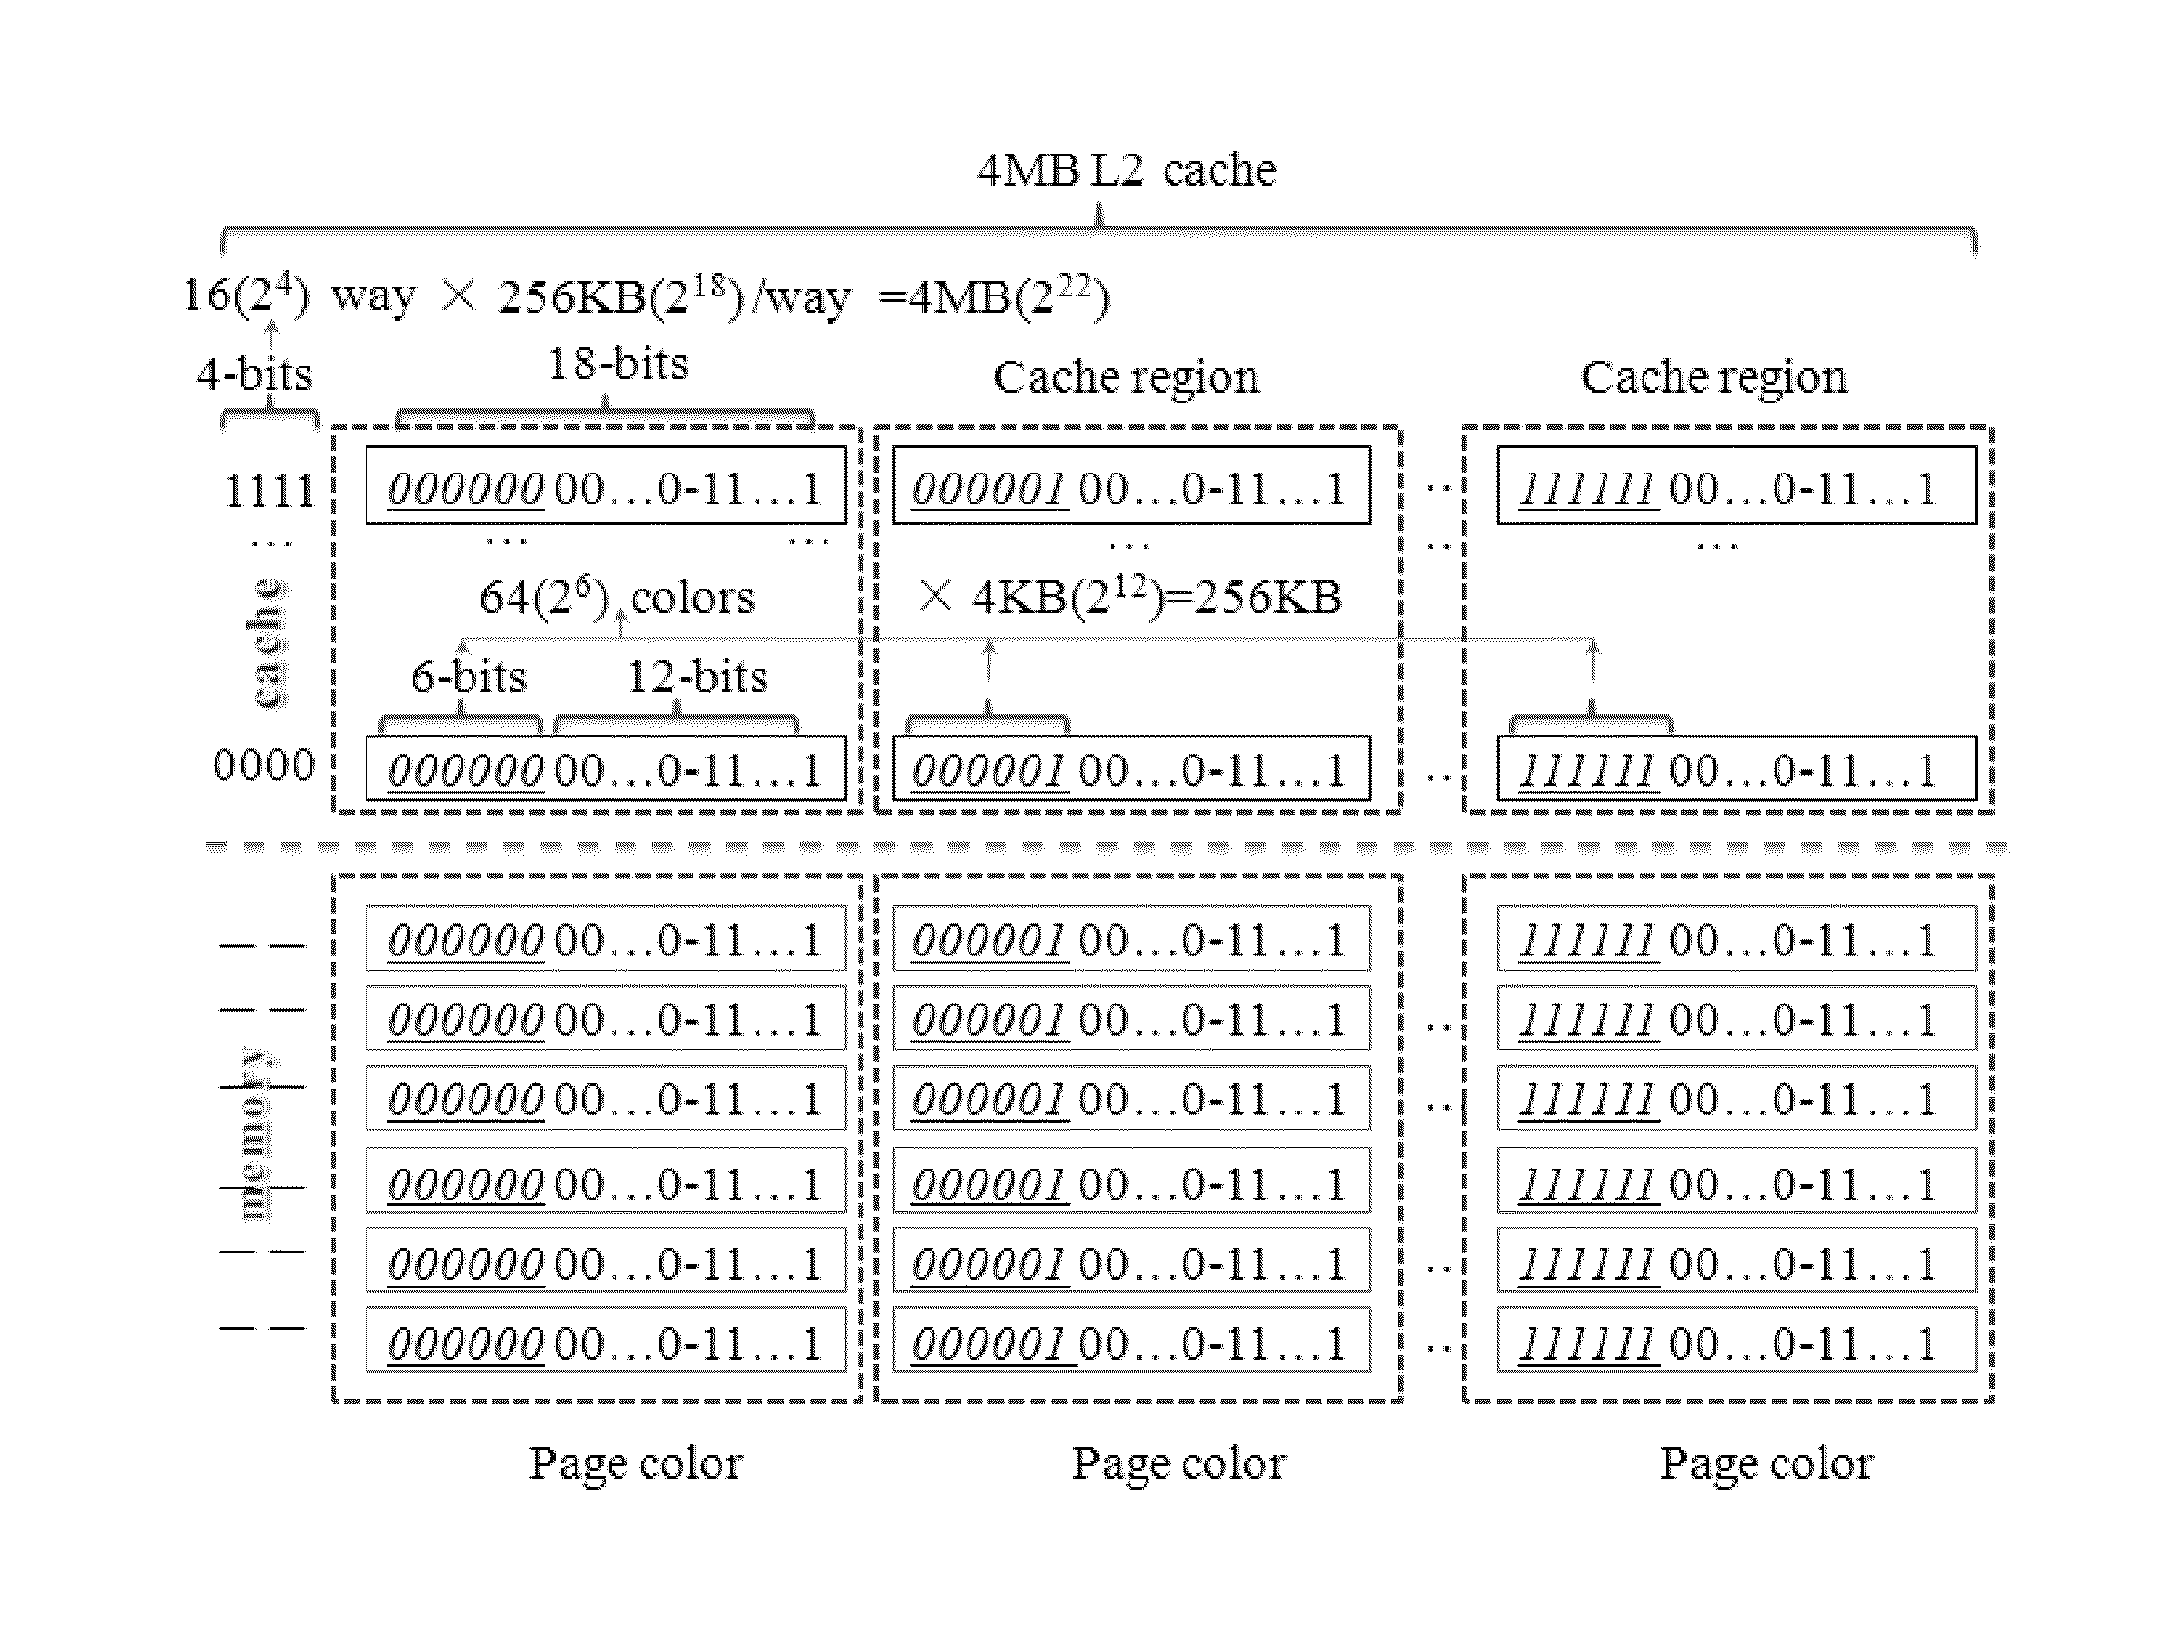 Access optimization method for main memory database based on page-coloring